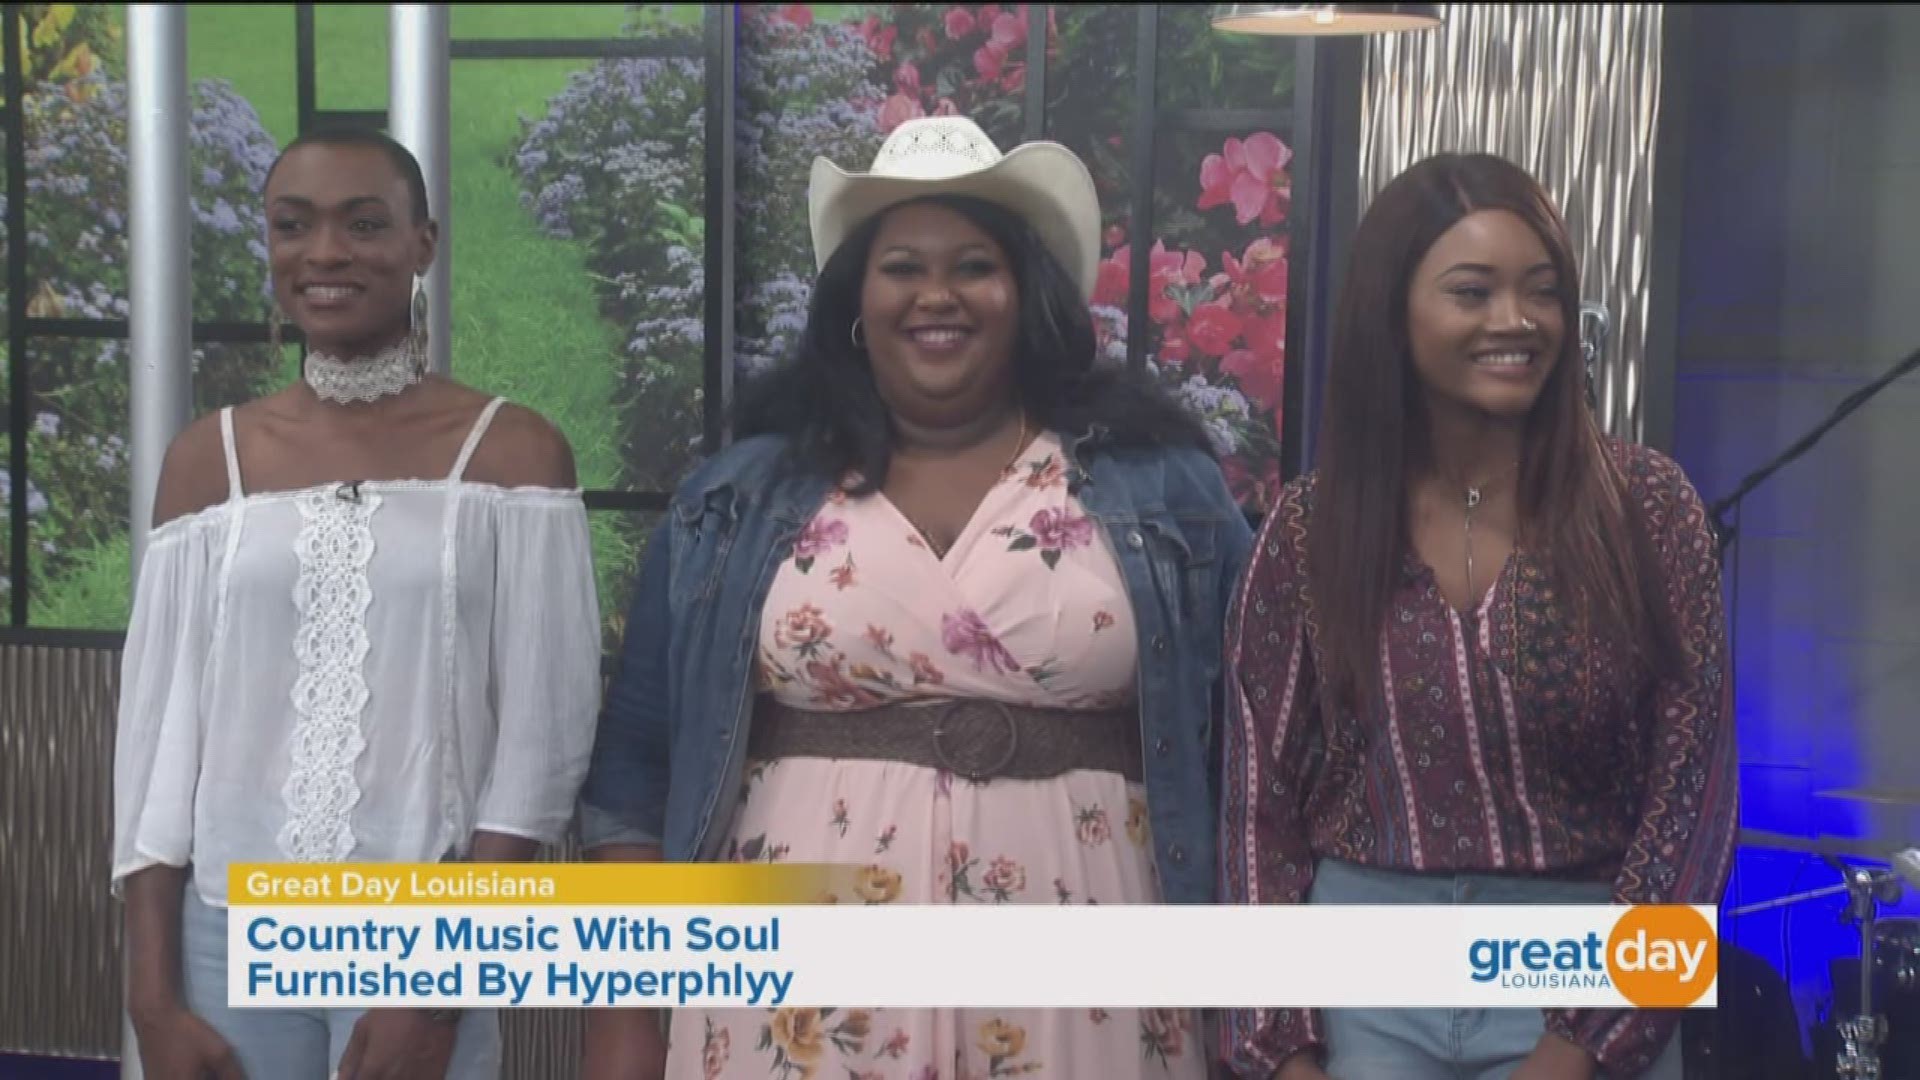 Our musical guests in-studio this morning are two sisters and a cousin from Poplarville, Mississippi. They're known as Hyperphlyy, a country band with plenty of soul.